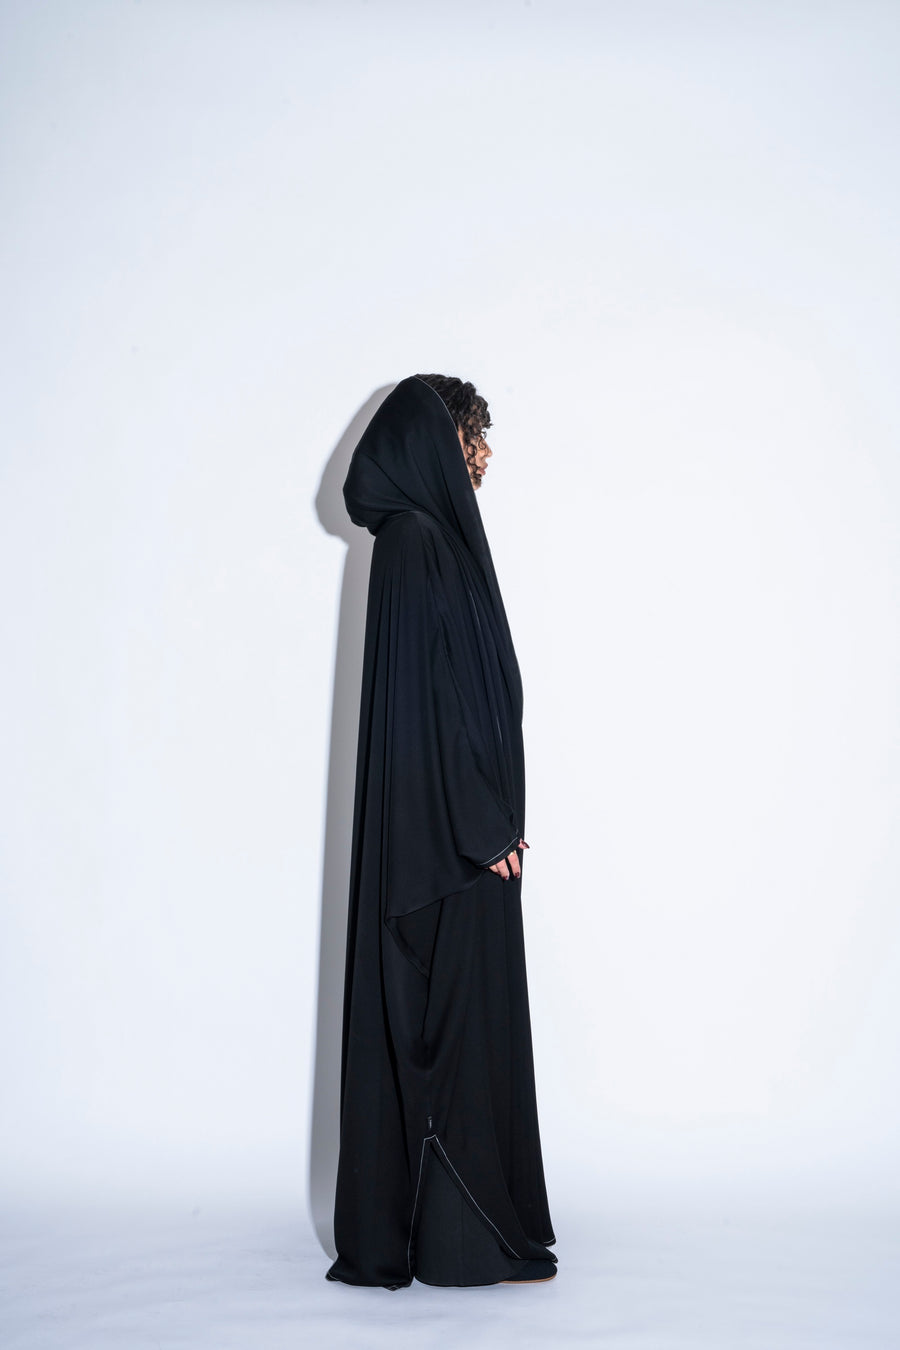 BISHT WITH ATTACHED HEADSCARF